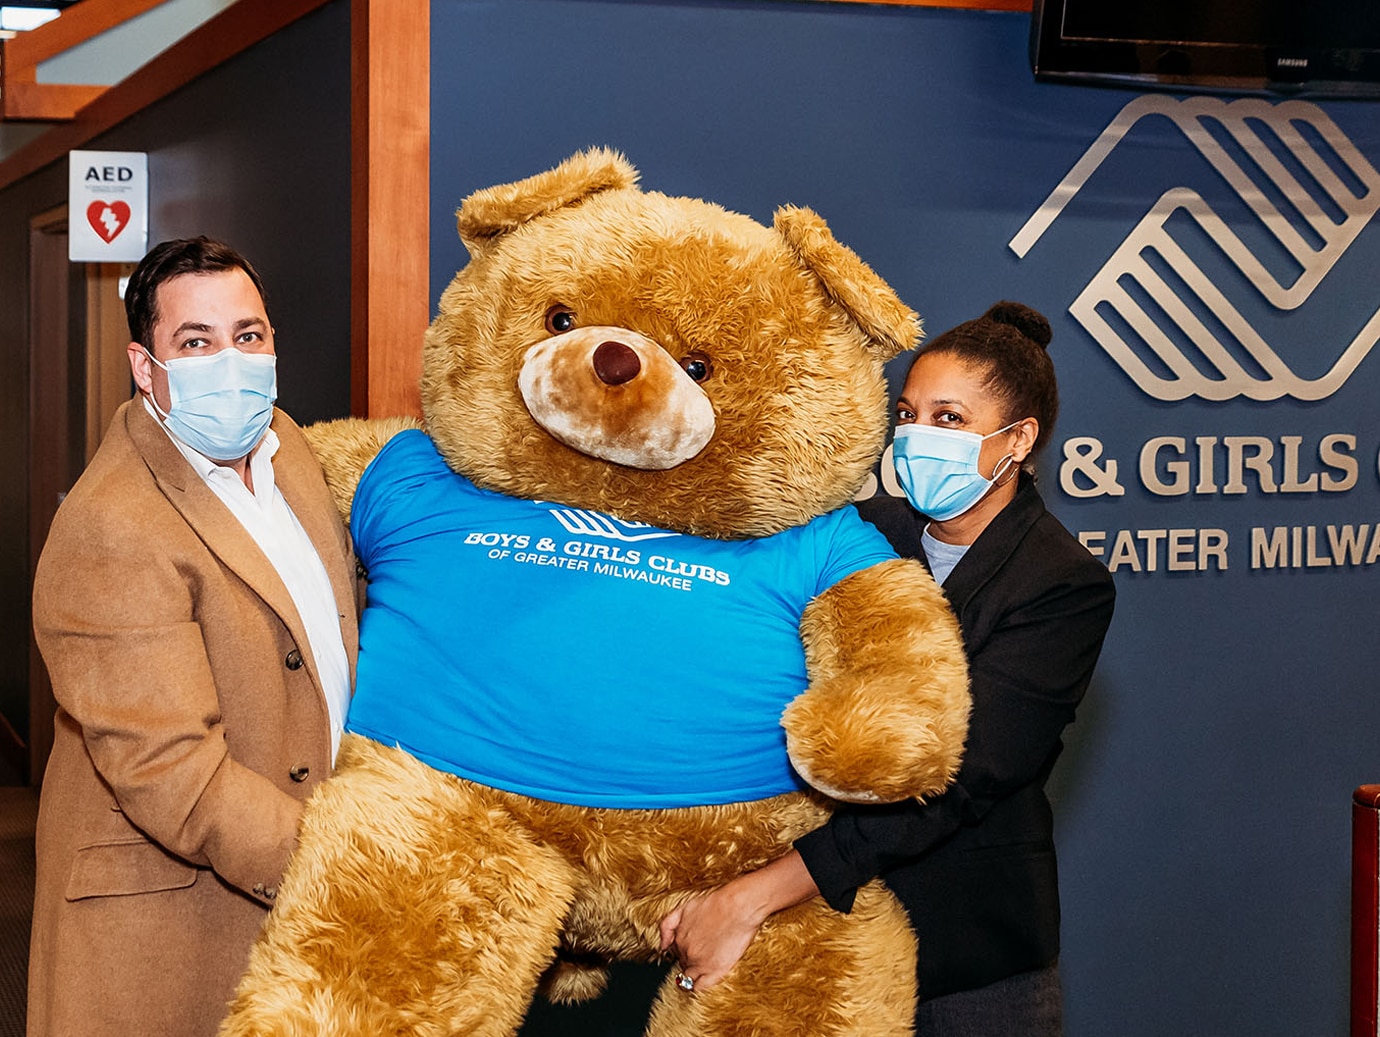 Man and woman posing with a teddy bear to promote Boys anf Girls club of Greater Milwuakee